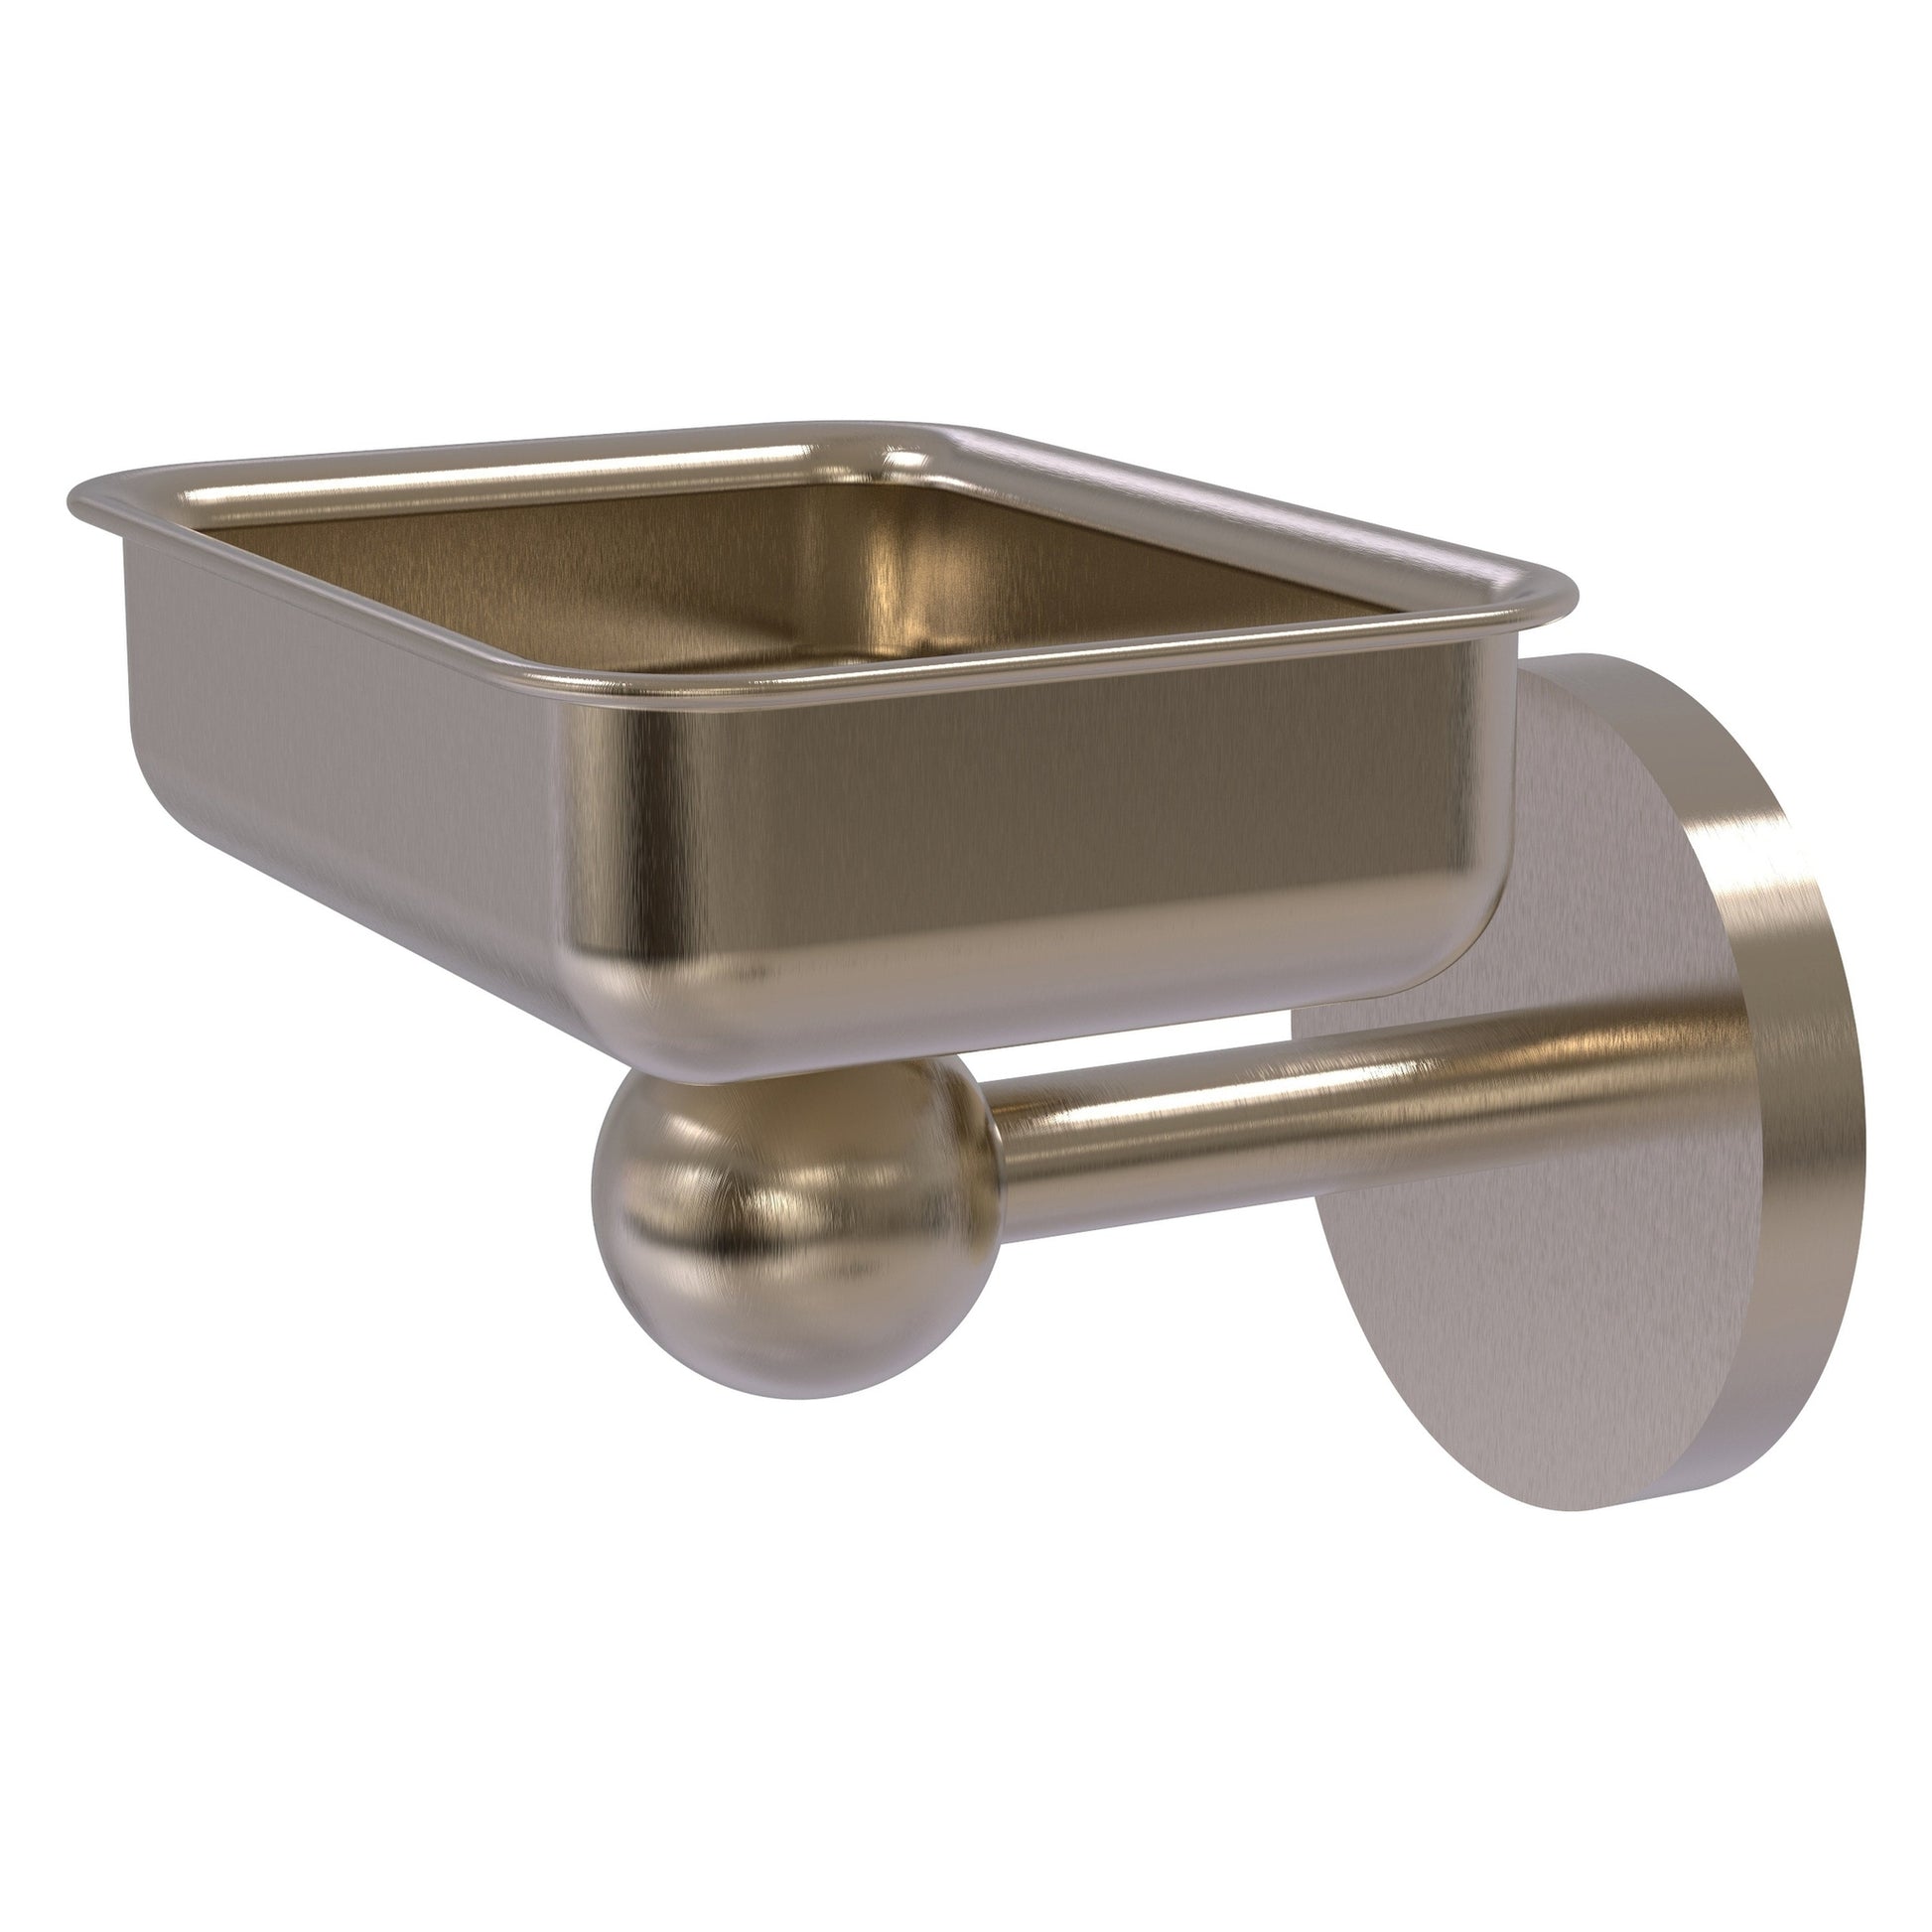 Allied Brass Skyline 4.5" x 3.5" Antique Pewter Solid Brass Wall-Mounted Soap Dish